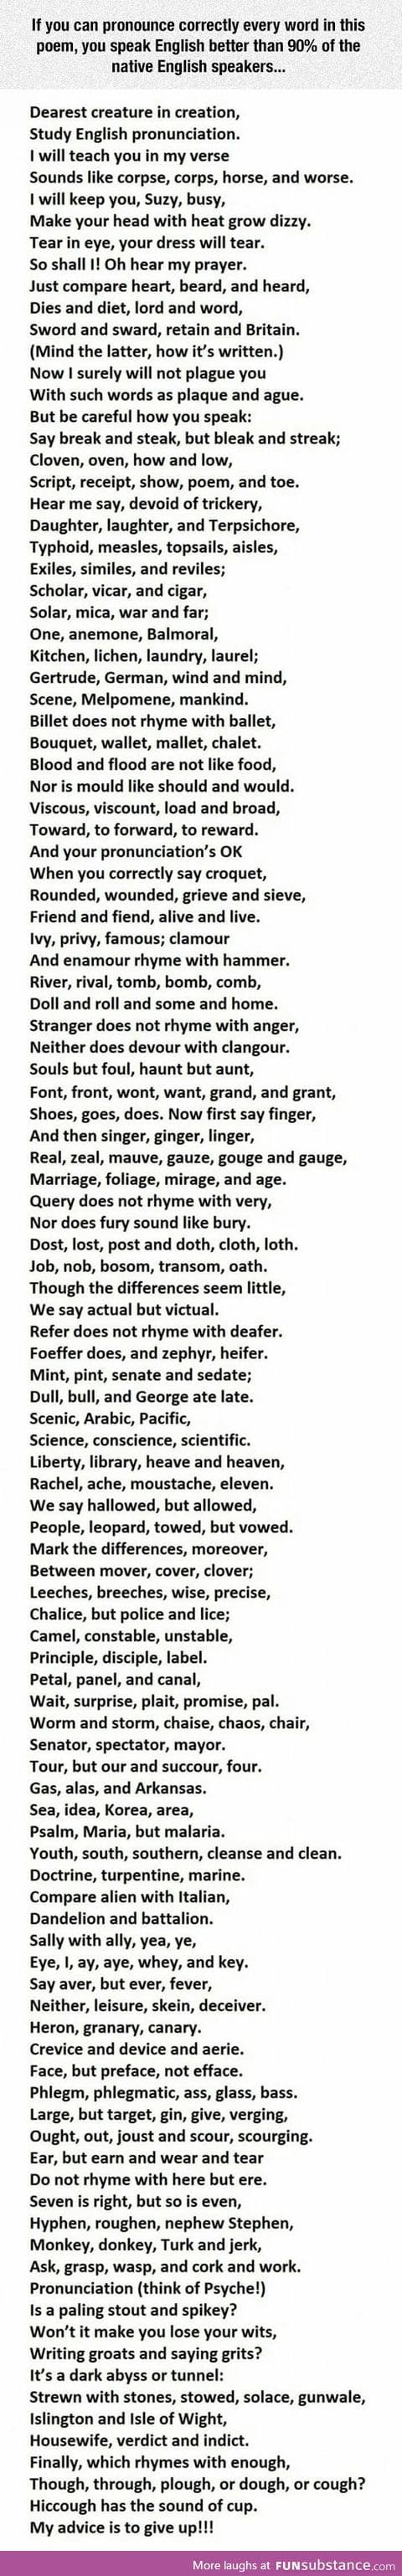 Here's An English Poem to Test Your Pronounciation